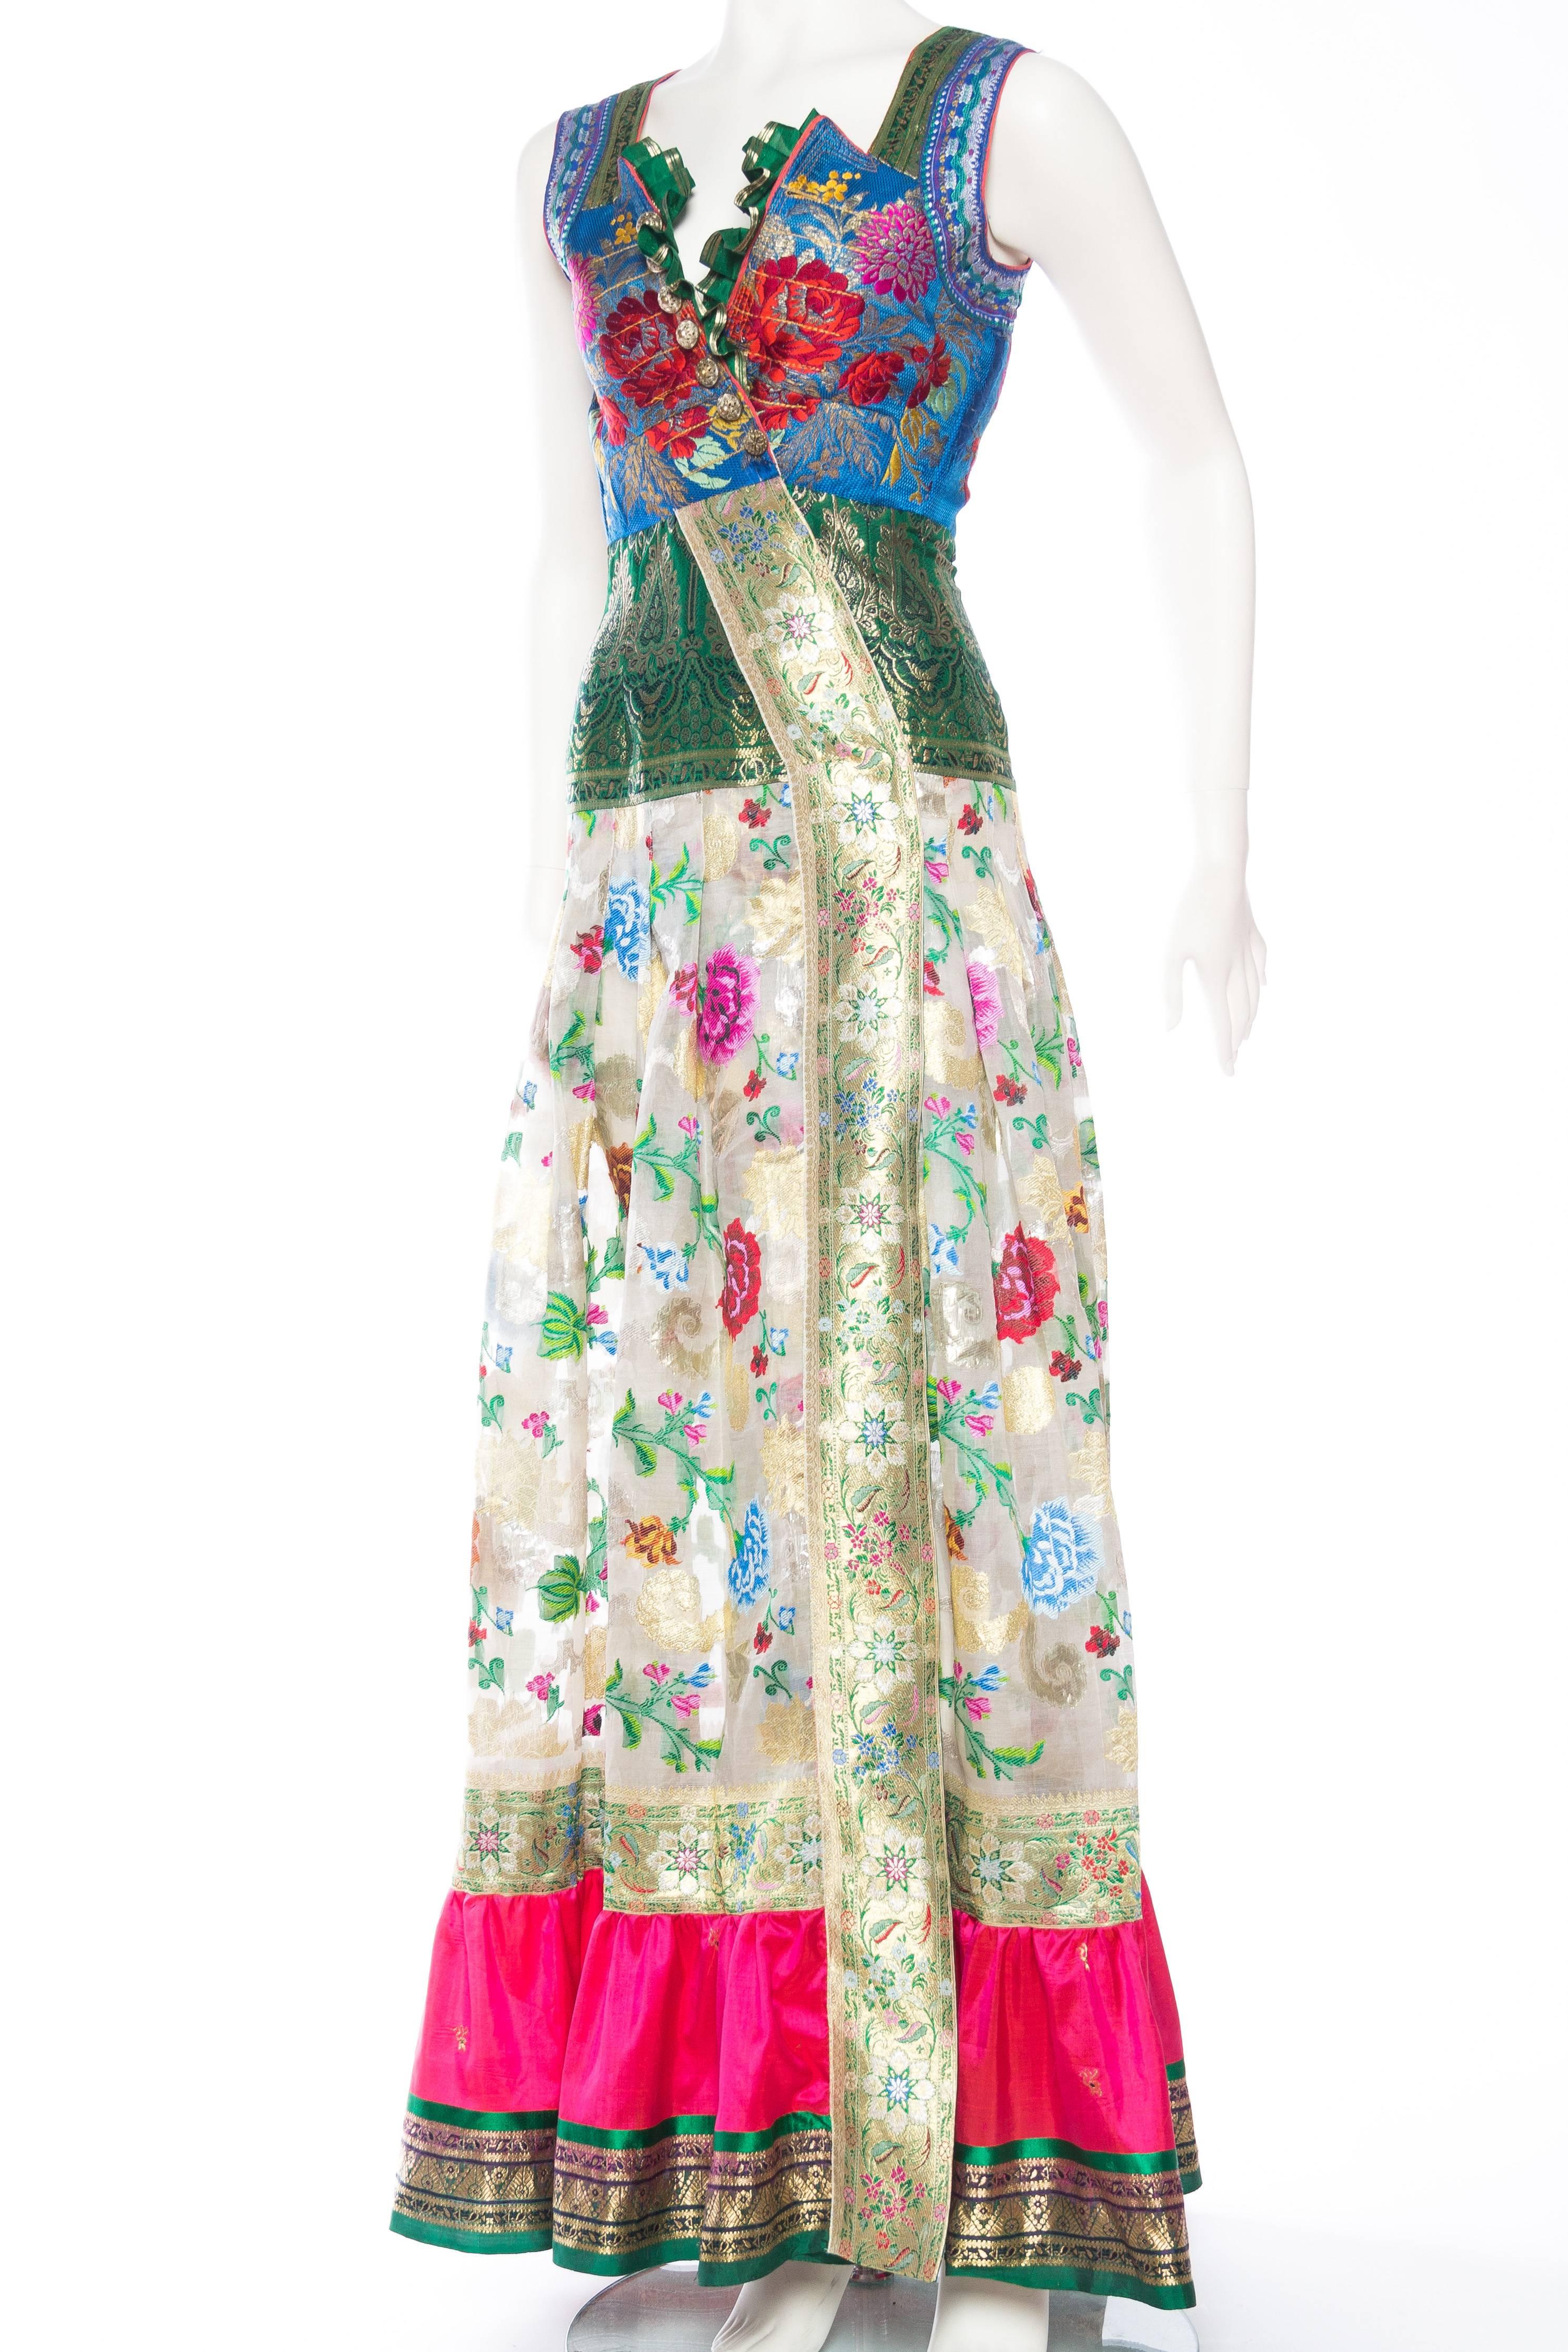 Dress made from Antique Folk and Indian Silks with Metallics. Piece can be worn open as a dramatic tunic vest as well. 